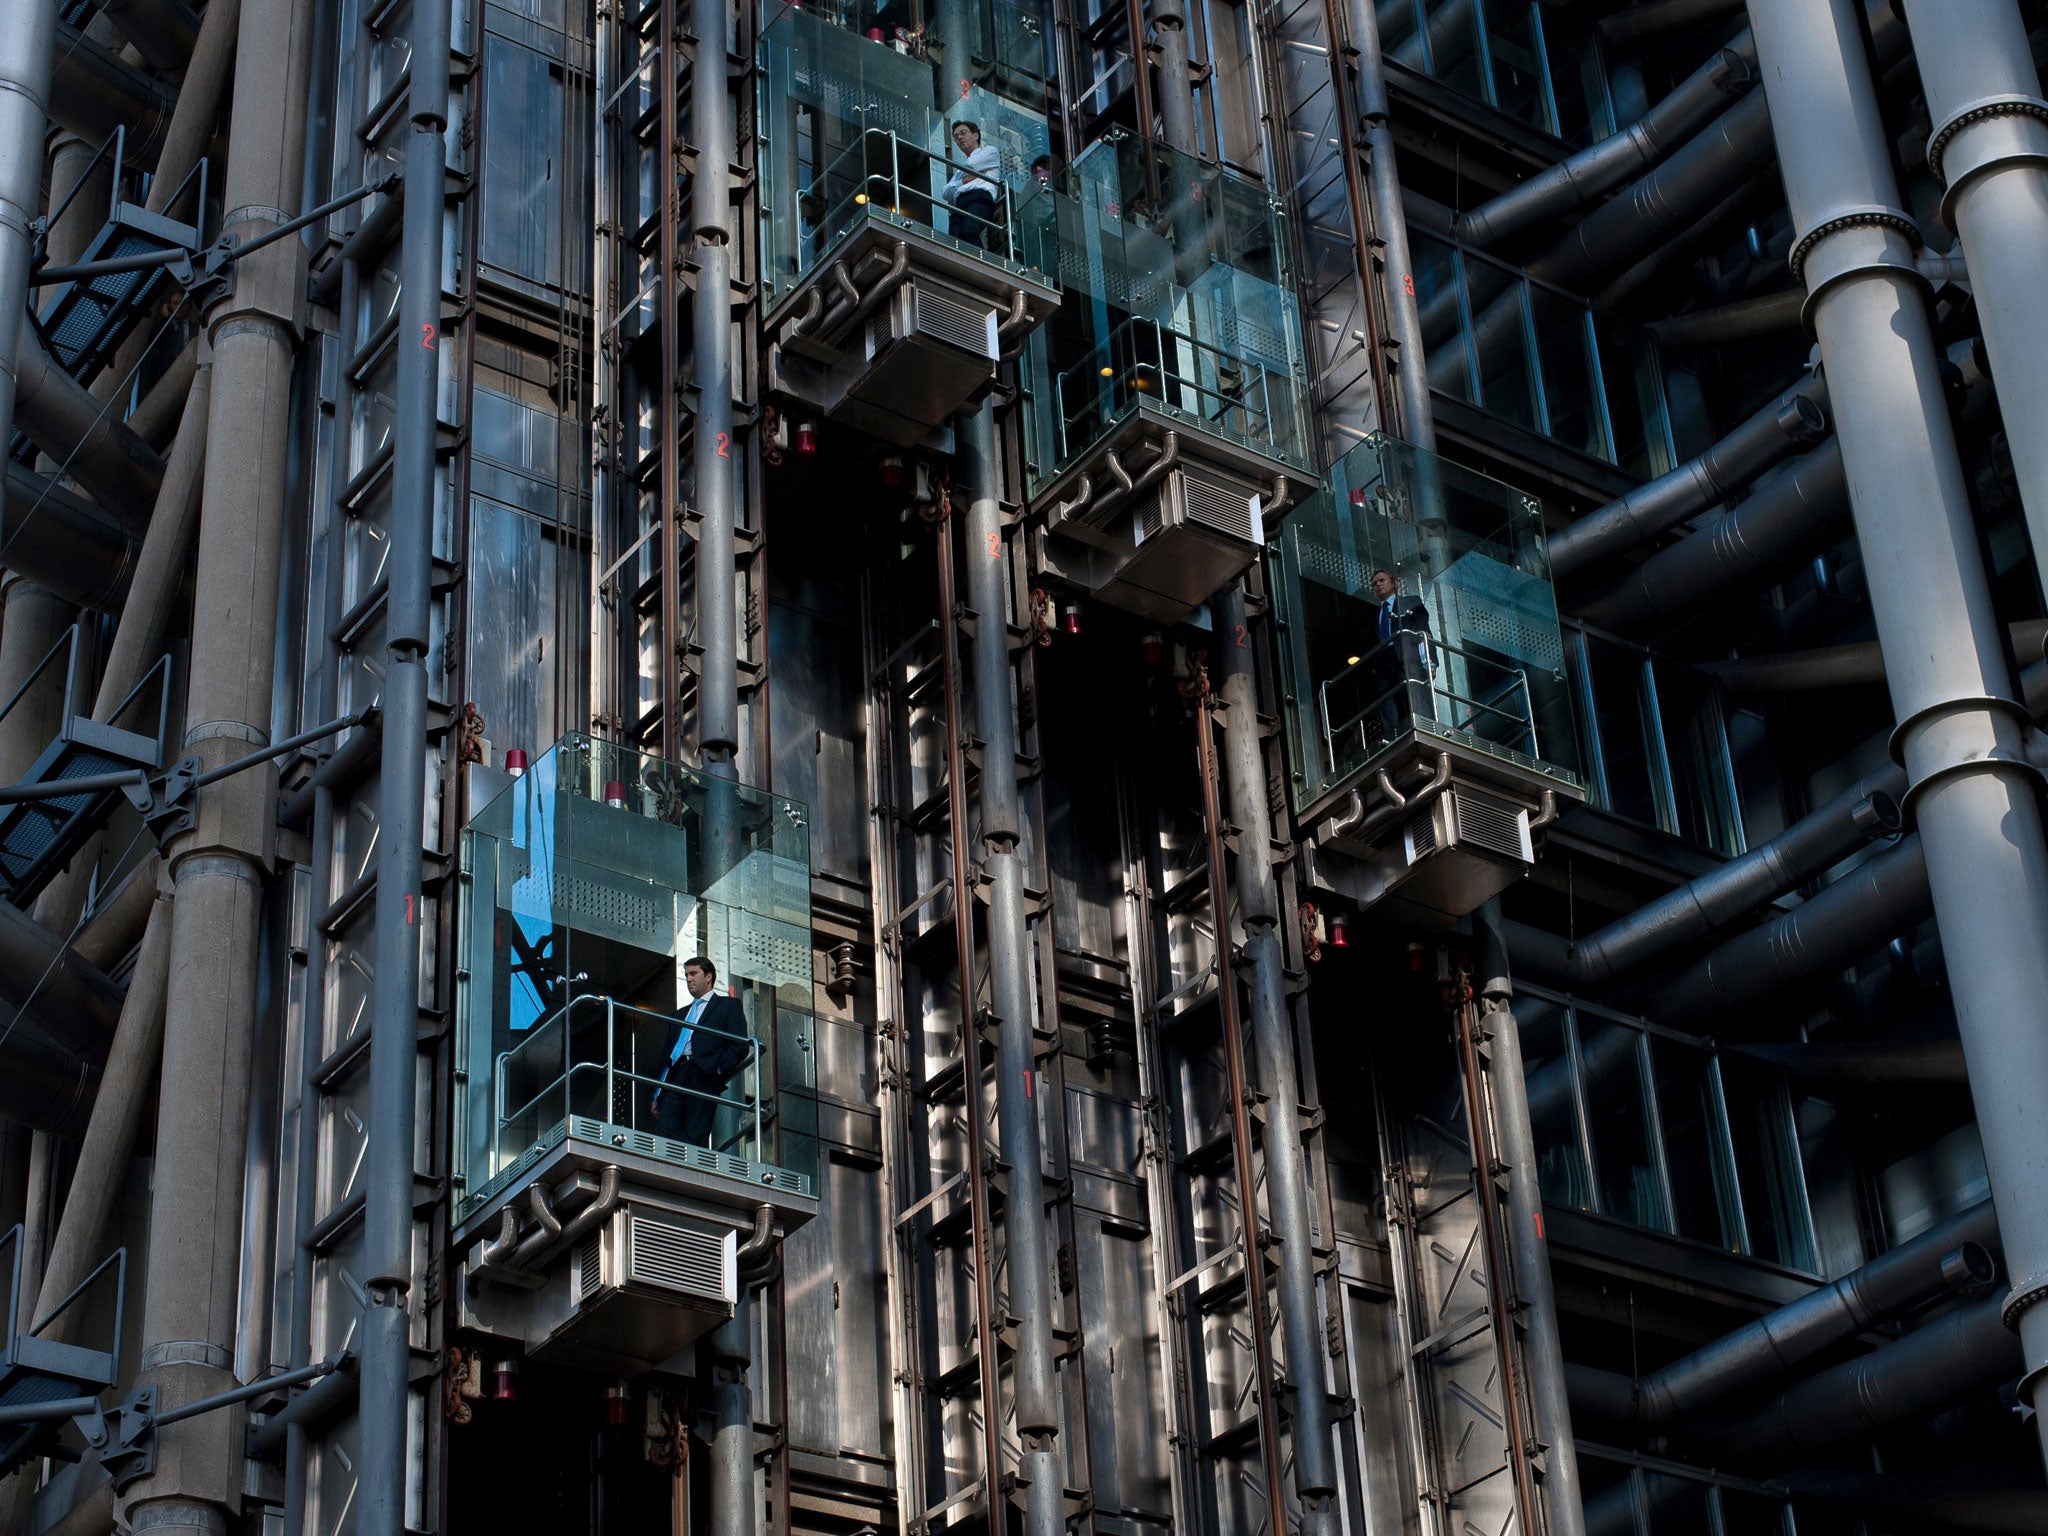 The Lloyd’s building in London